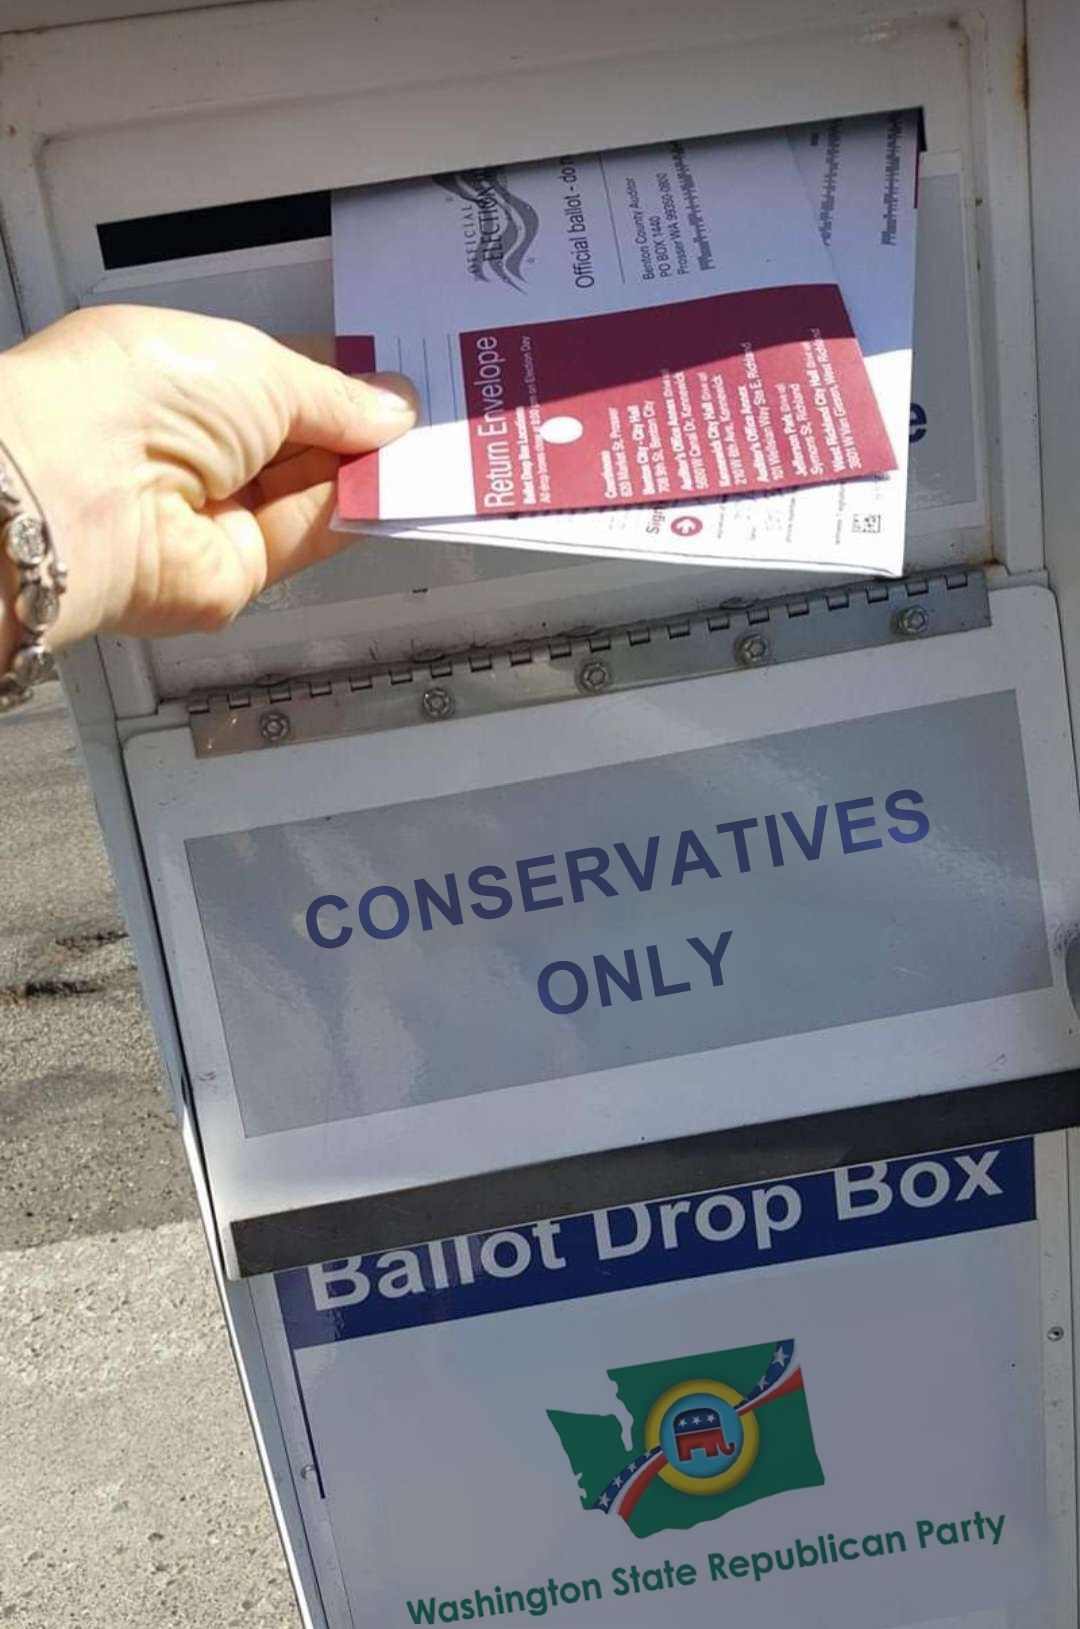 Let's buy our own ballot dropbox…